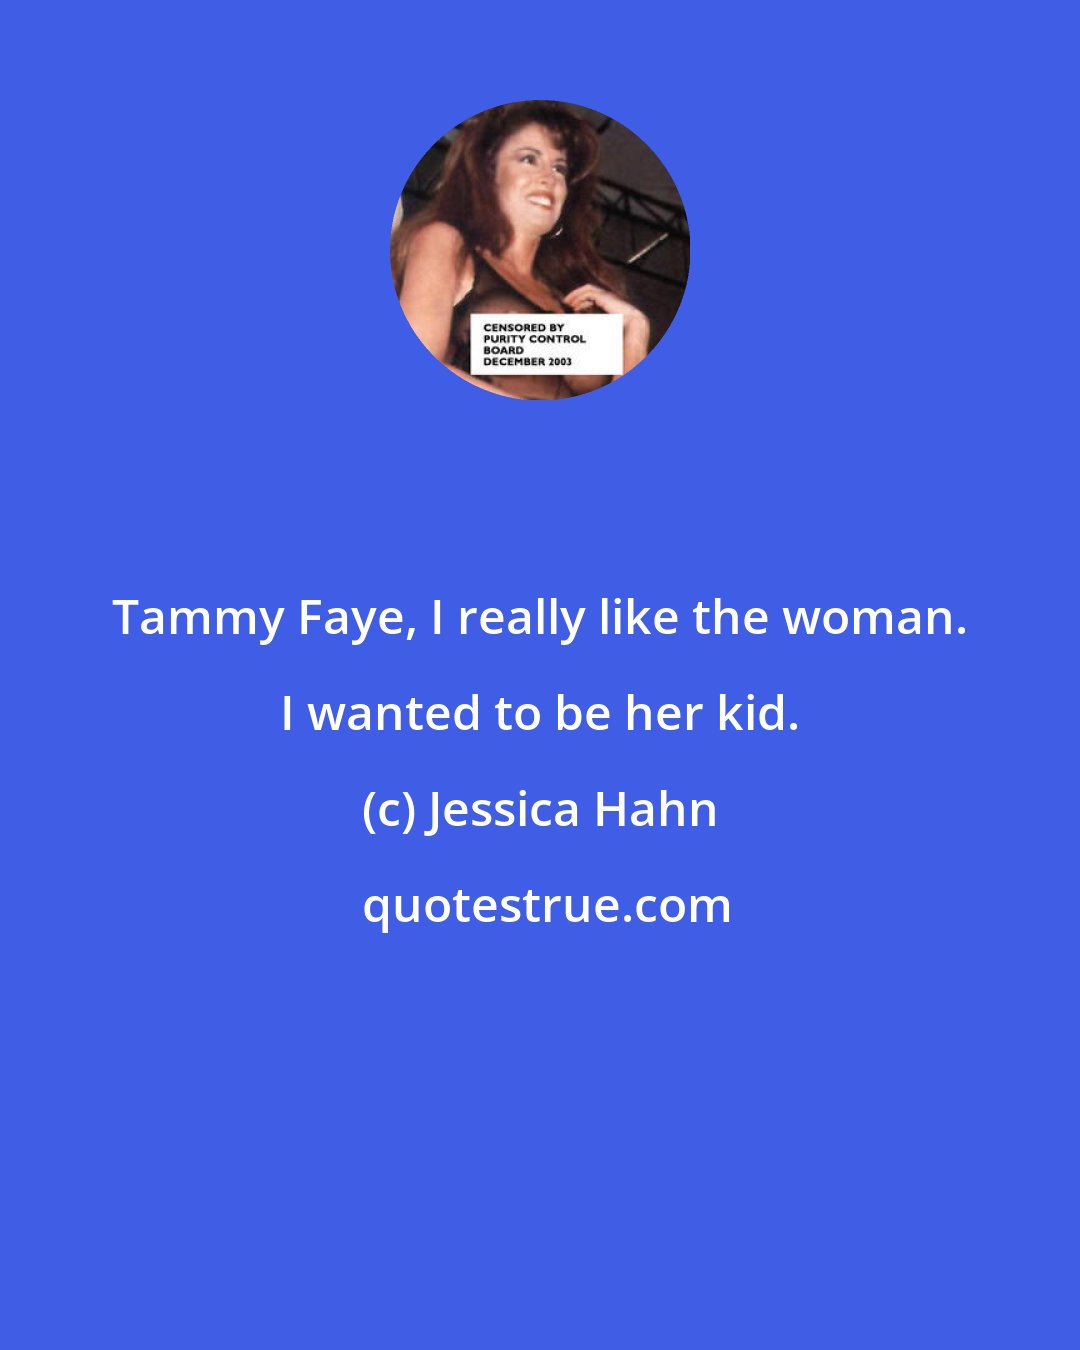 Jessica Hahn: Tammy Faye, I really like the woman. I wanted to be her kid.